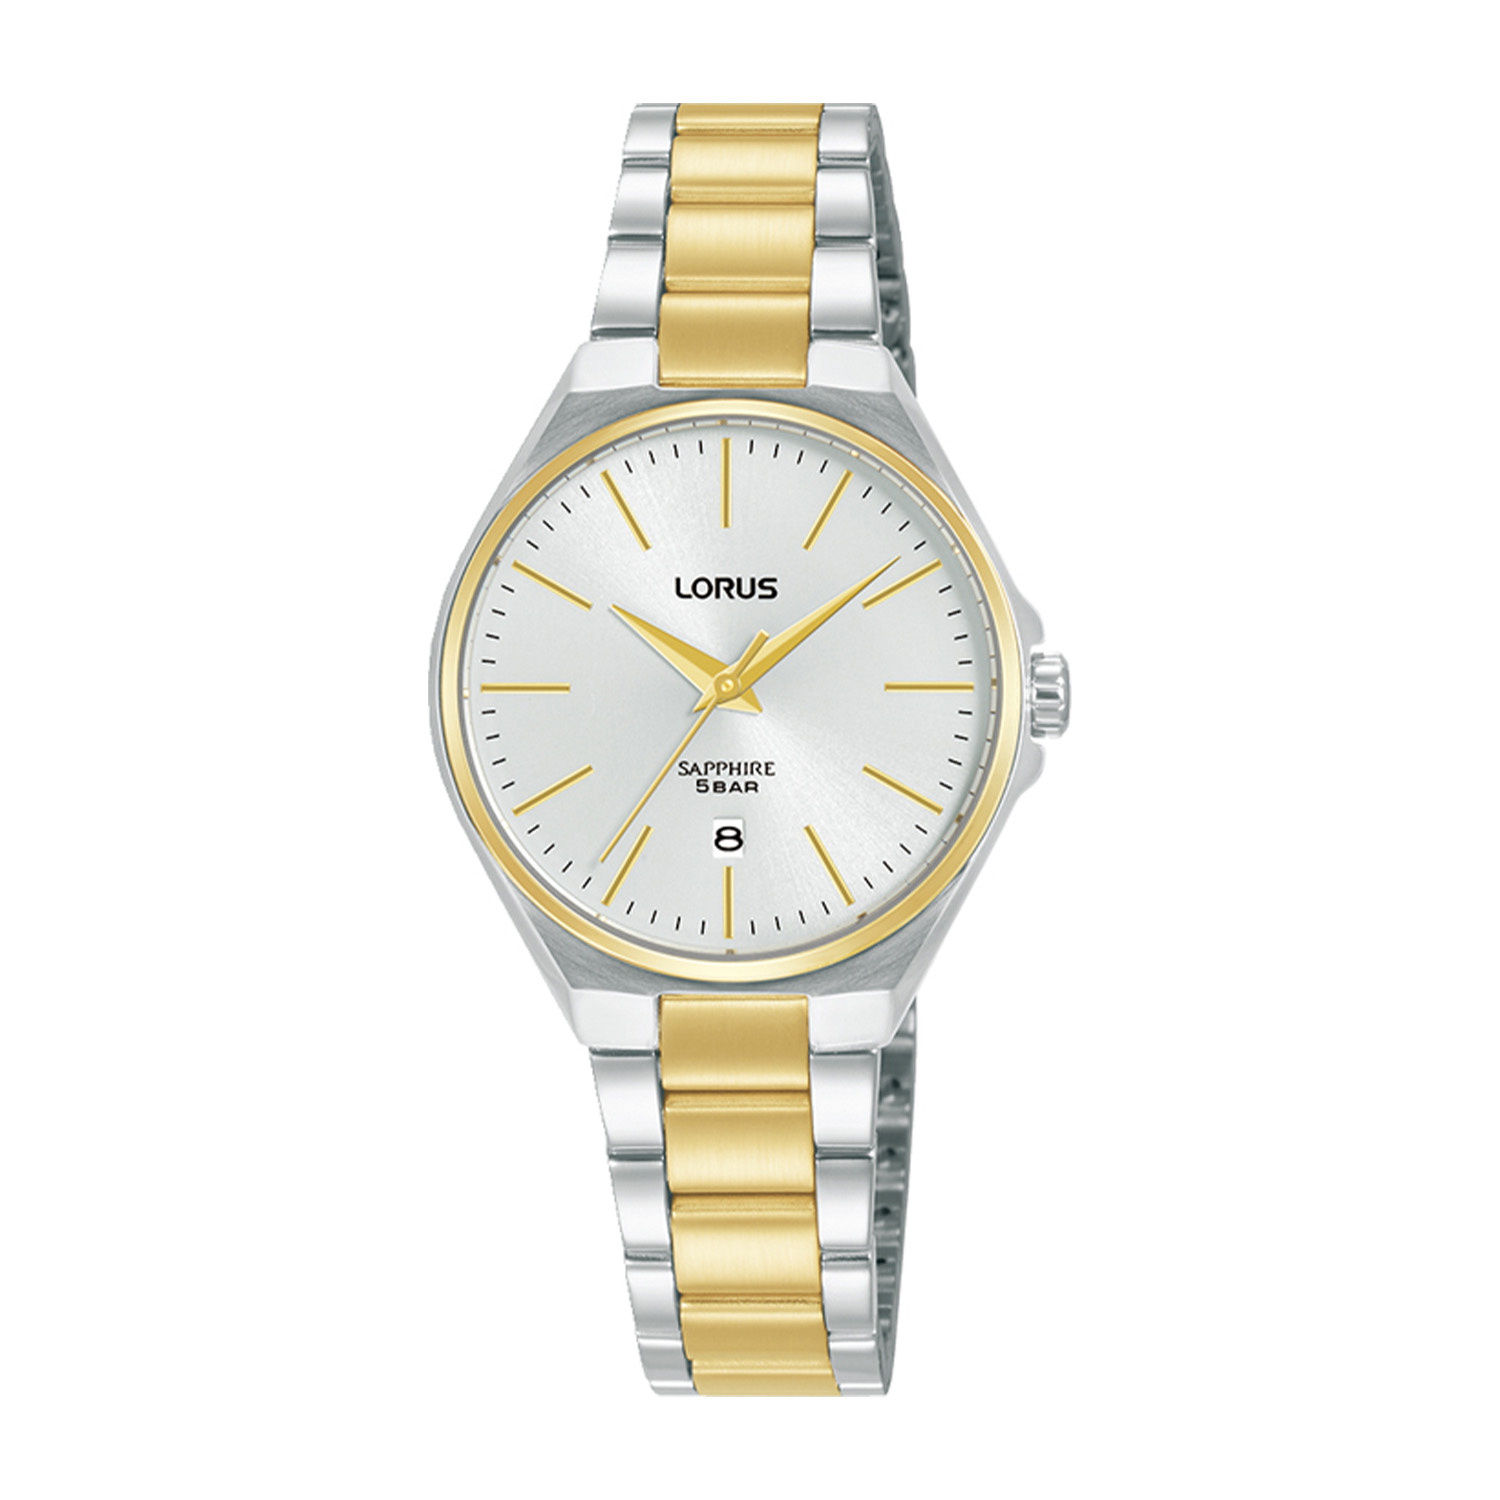 Womens watch LORUS made of two-tone stainless steel with white dial and bracelet.